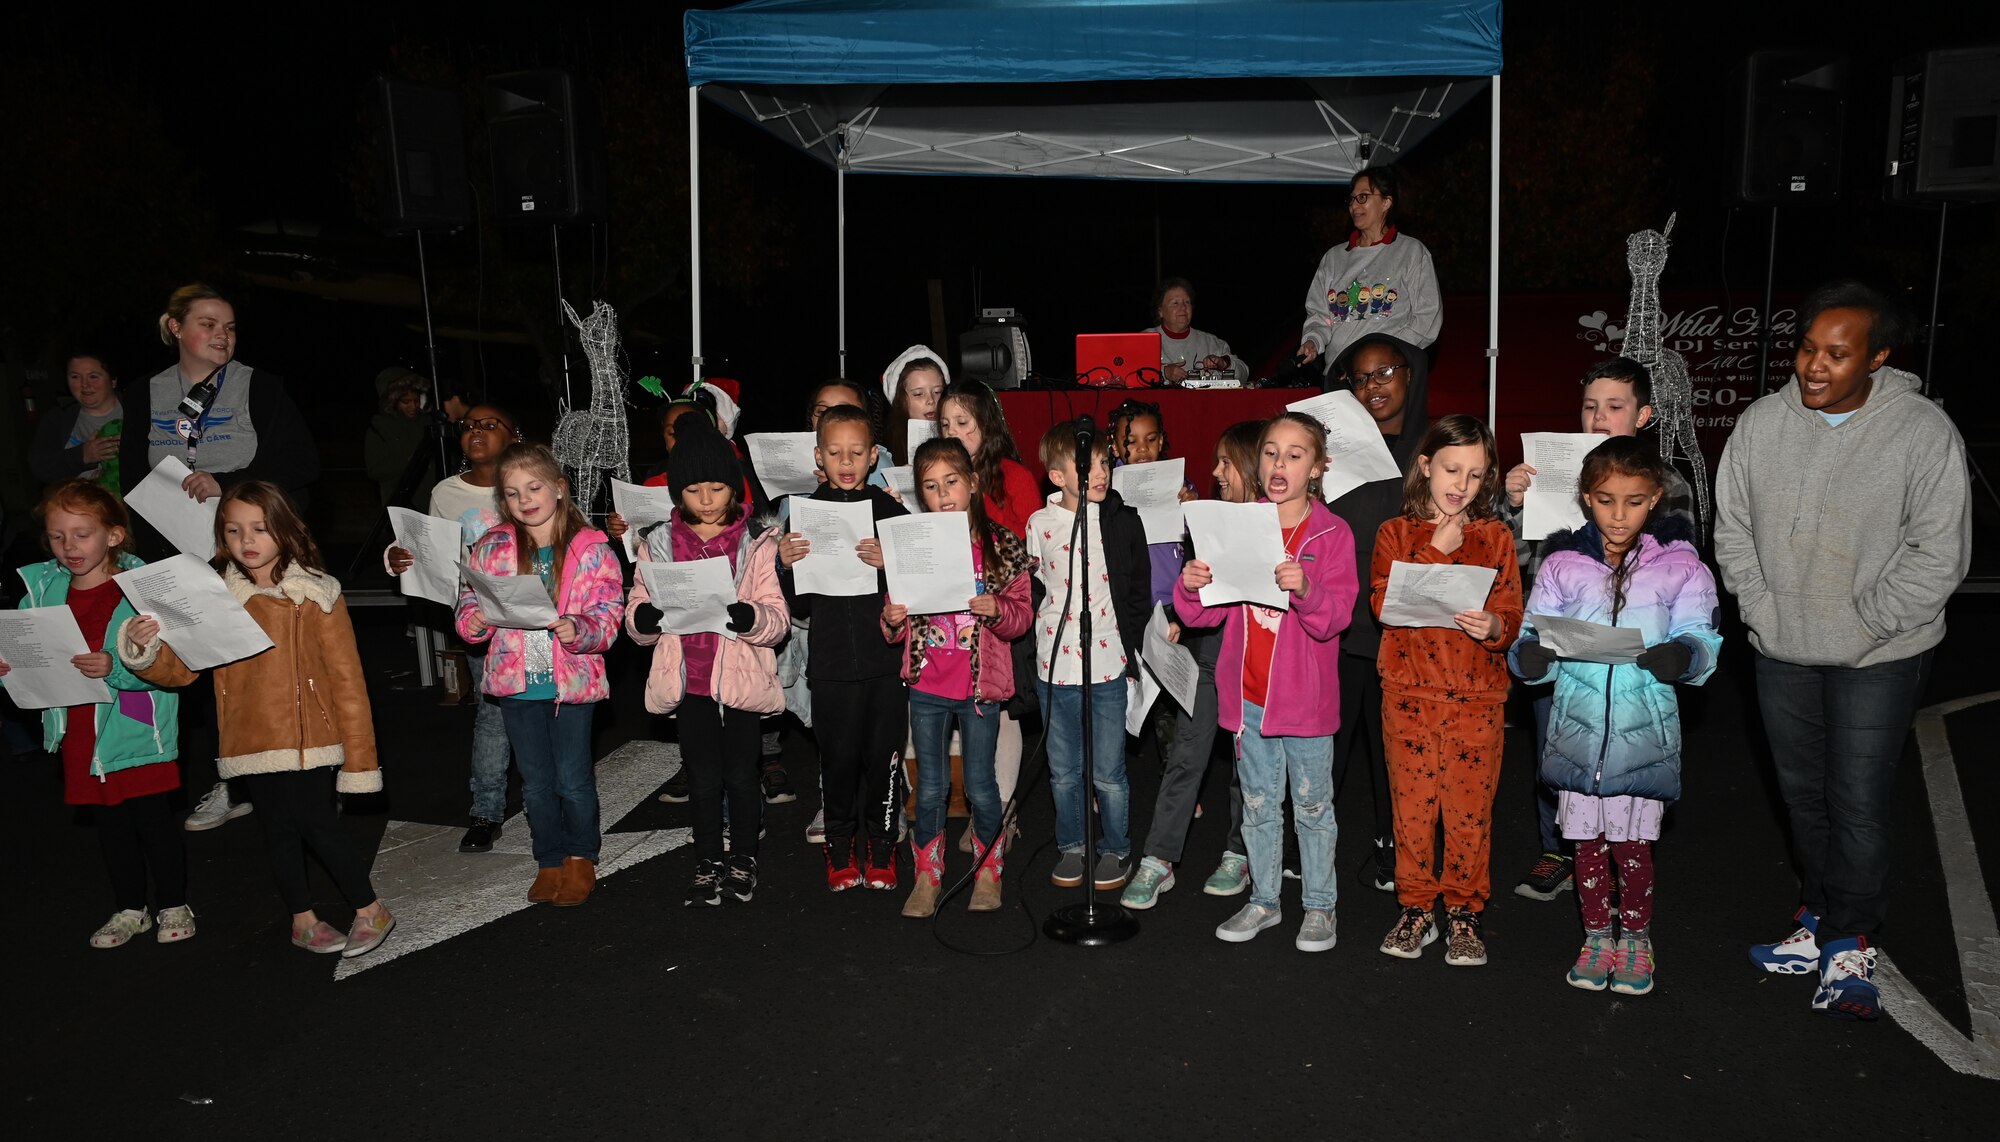 Children from the Seymour Johnson Air Force Base Youth Center sing Christmas carols during the Holiday Village and vendor fair at Seymour Johnson Air Force Base, North Carolina, Dec. 5, 2022. The celebration is hosted at the beginning of December each year for U.S. service members and their families to welcome the holiday season. (U.S. Air Force photo by Airman 1st Class Rebecca Sirimarco-Lang)